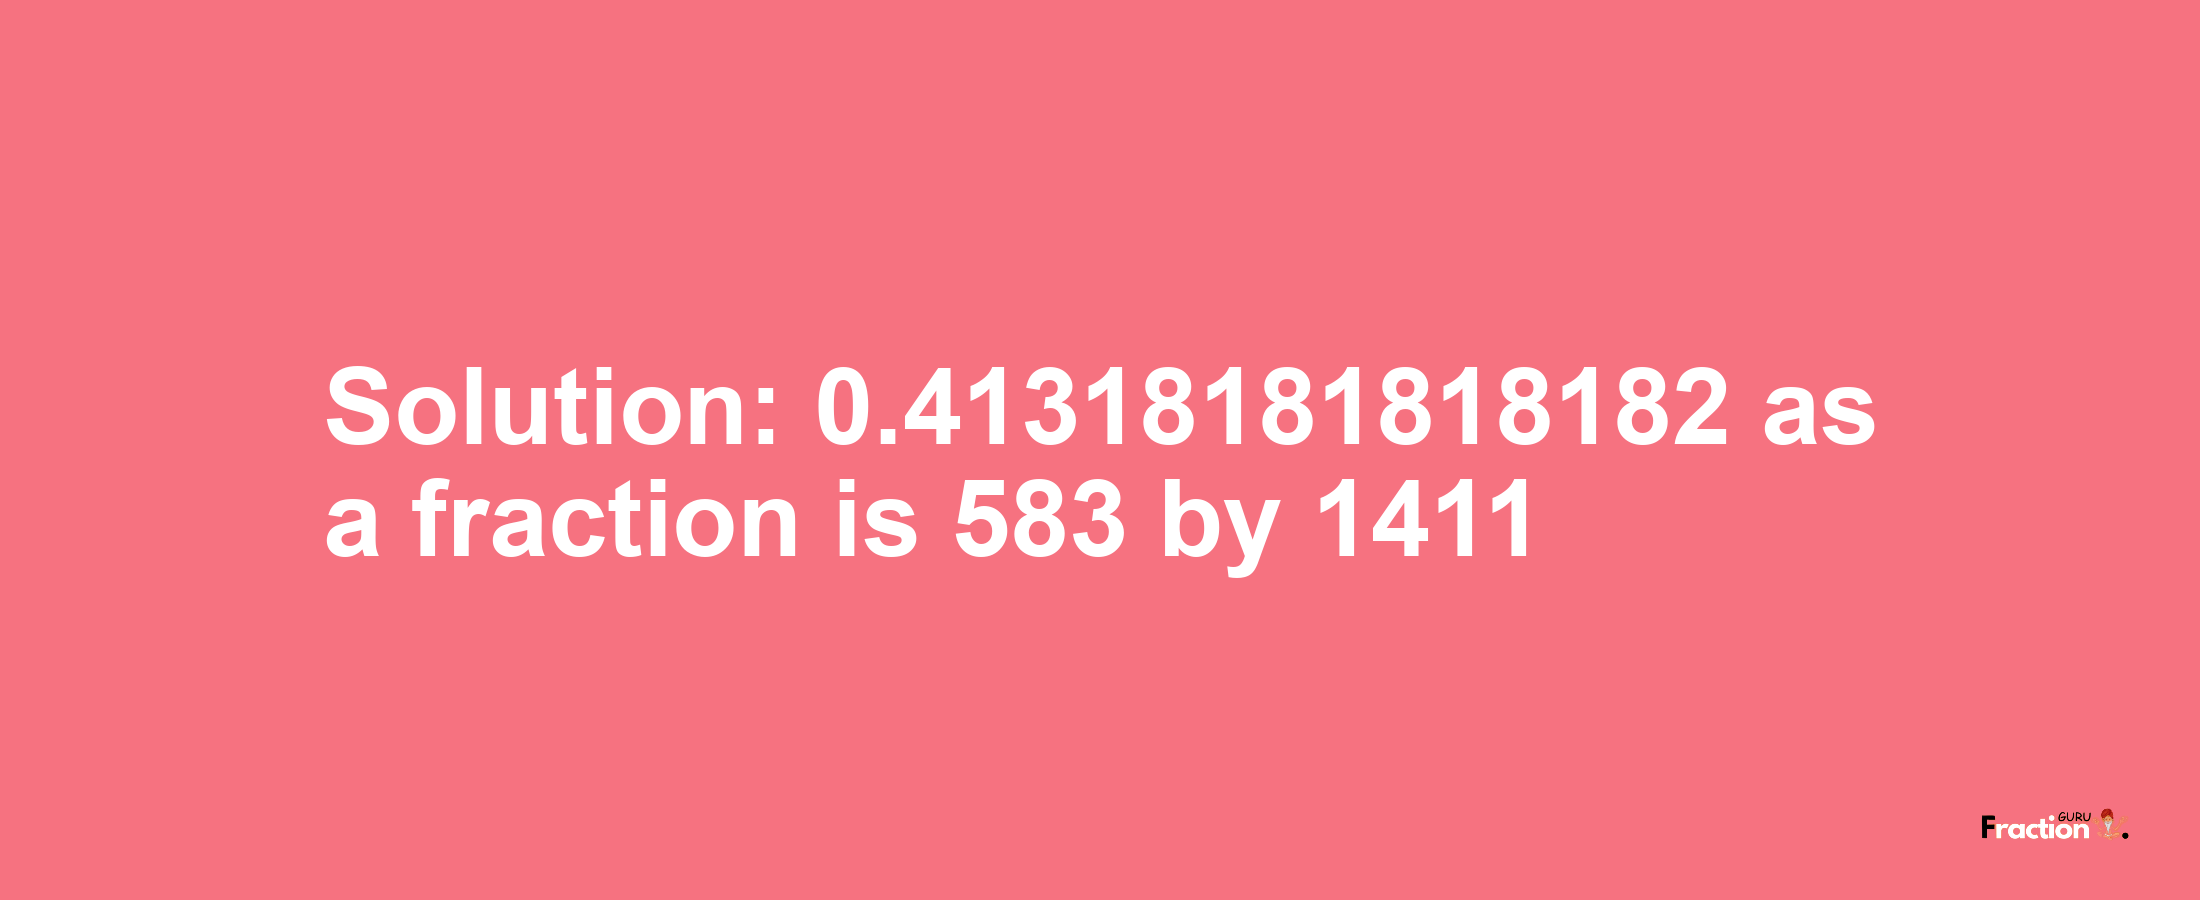 Solution:0.41318181818182 as a fraction is 583/1411